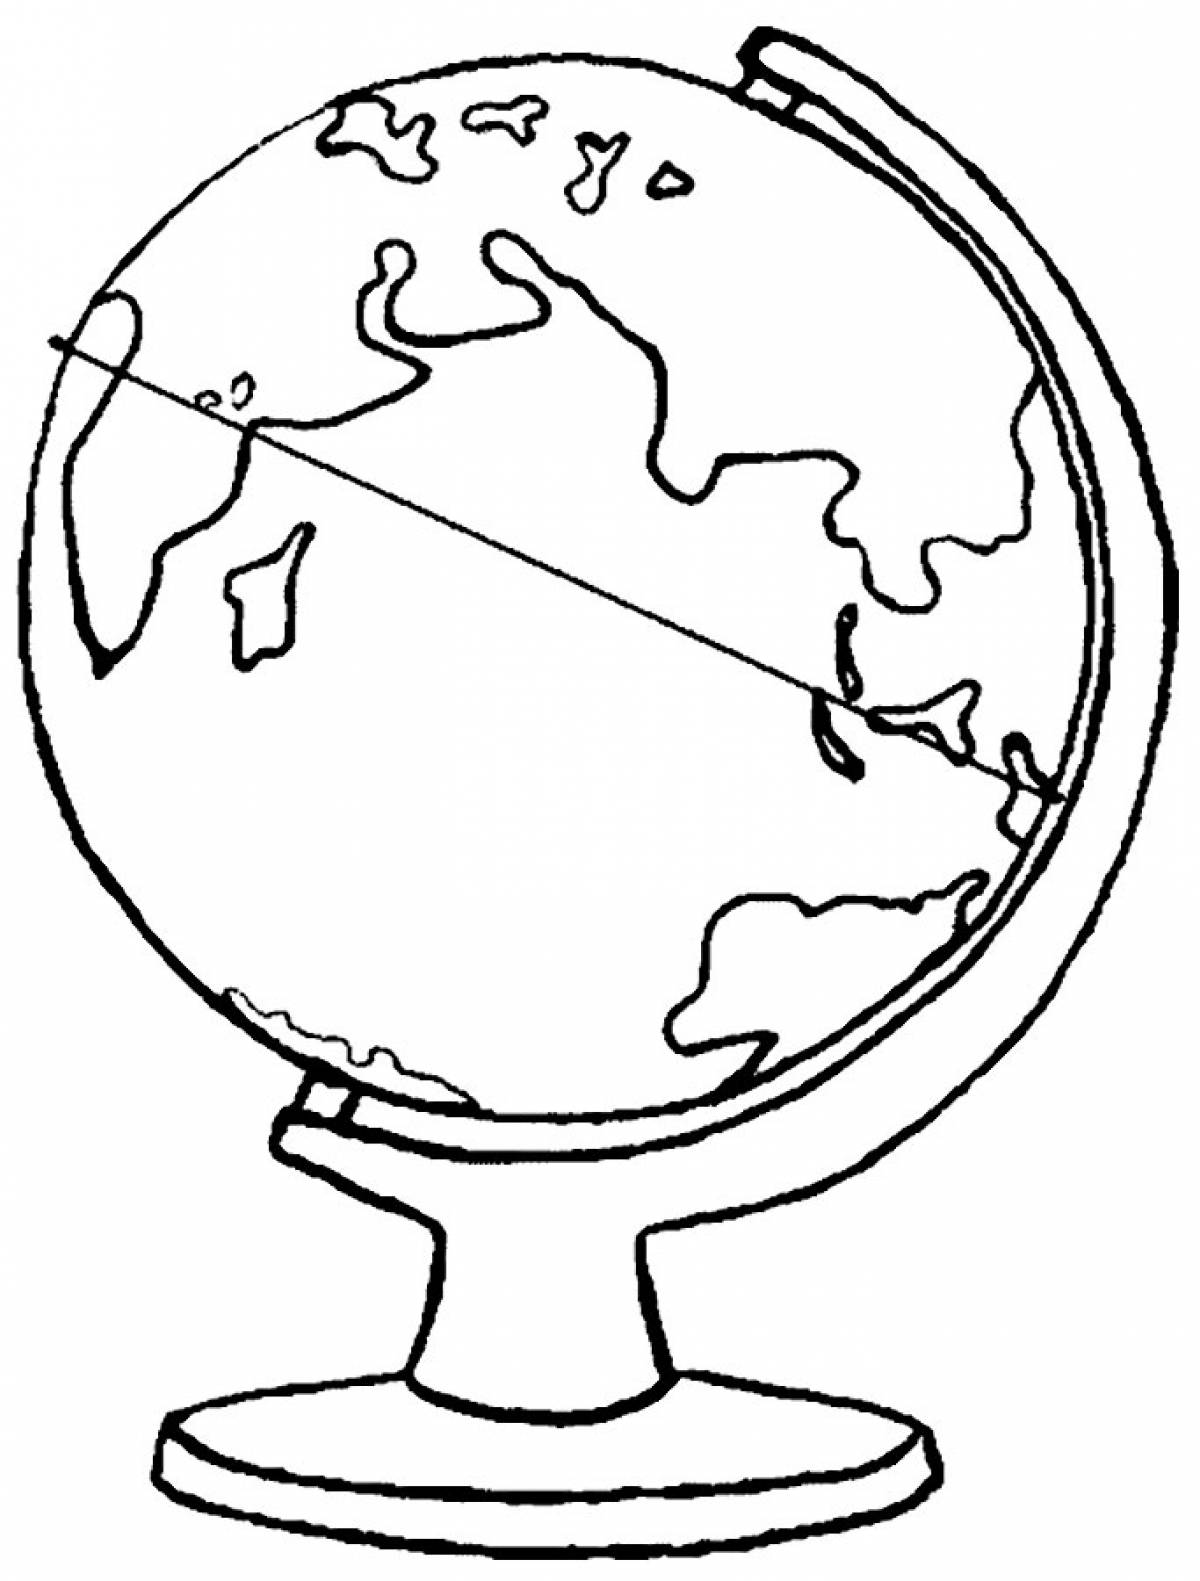 Globe coloring pages